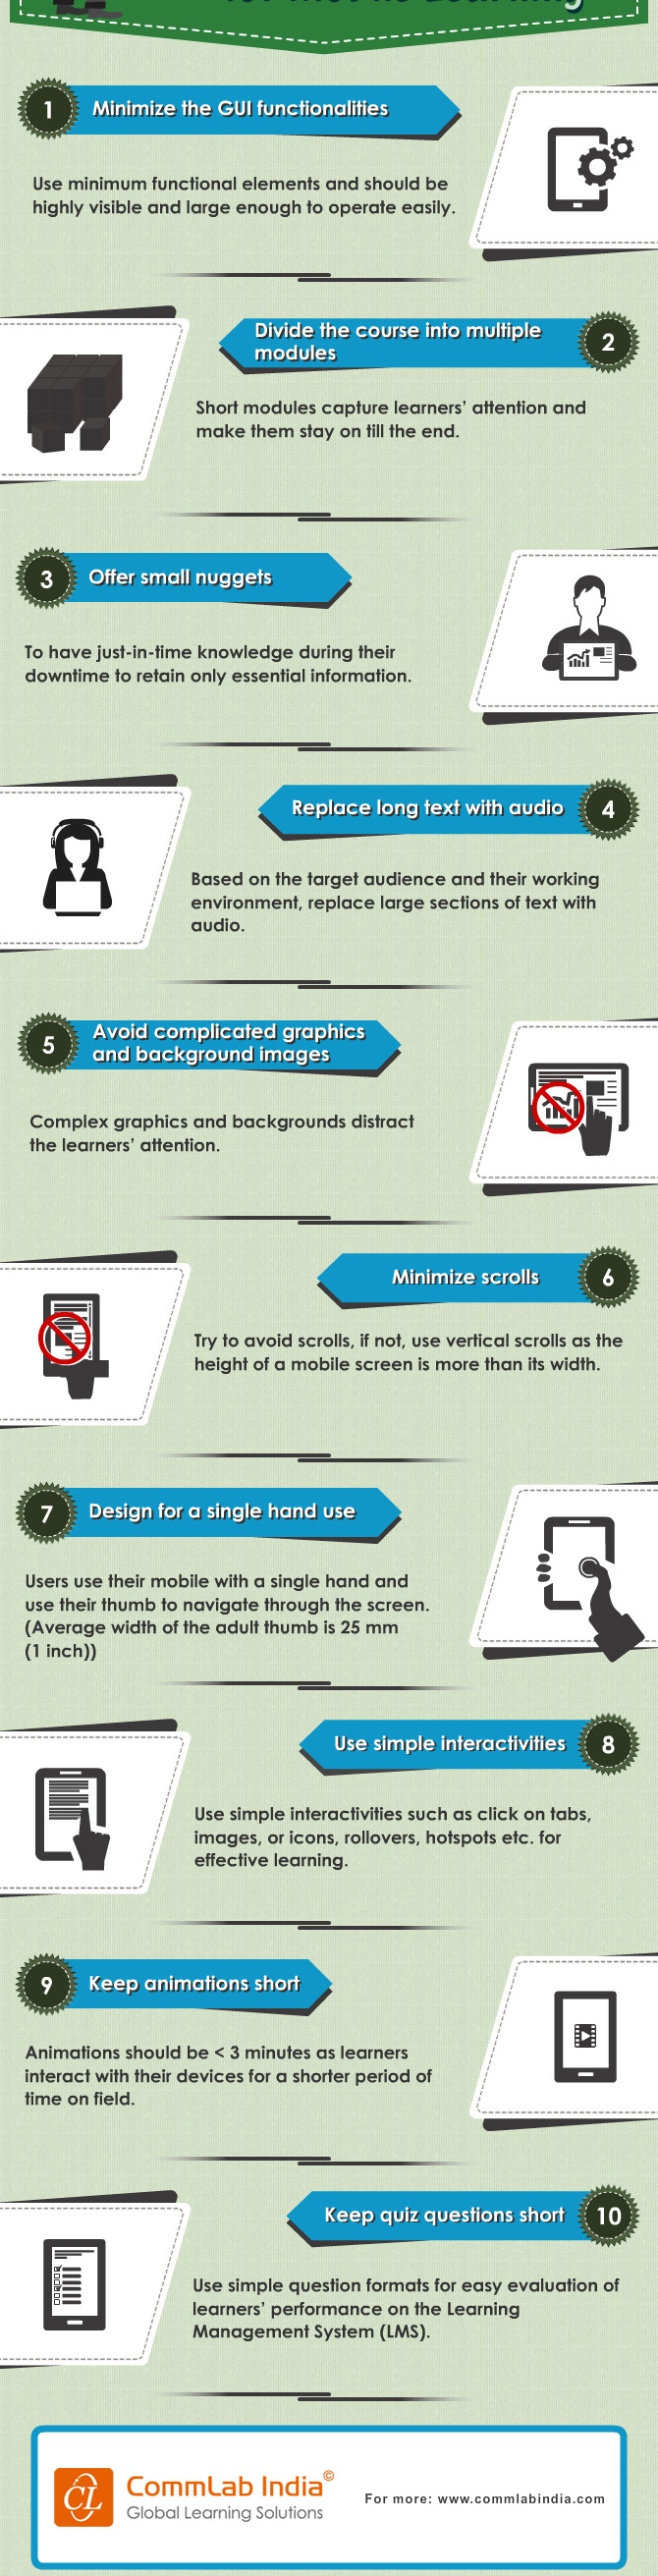 10 Learning Design Tips for Mobile Learning [Infographic]